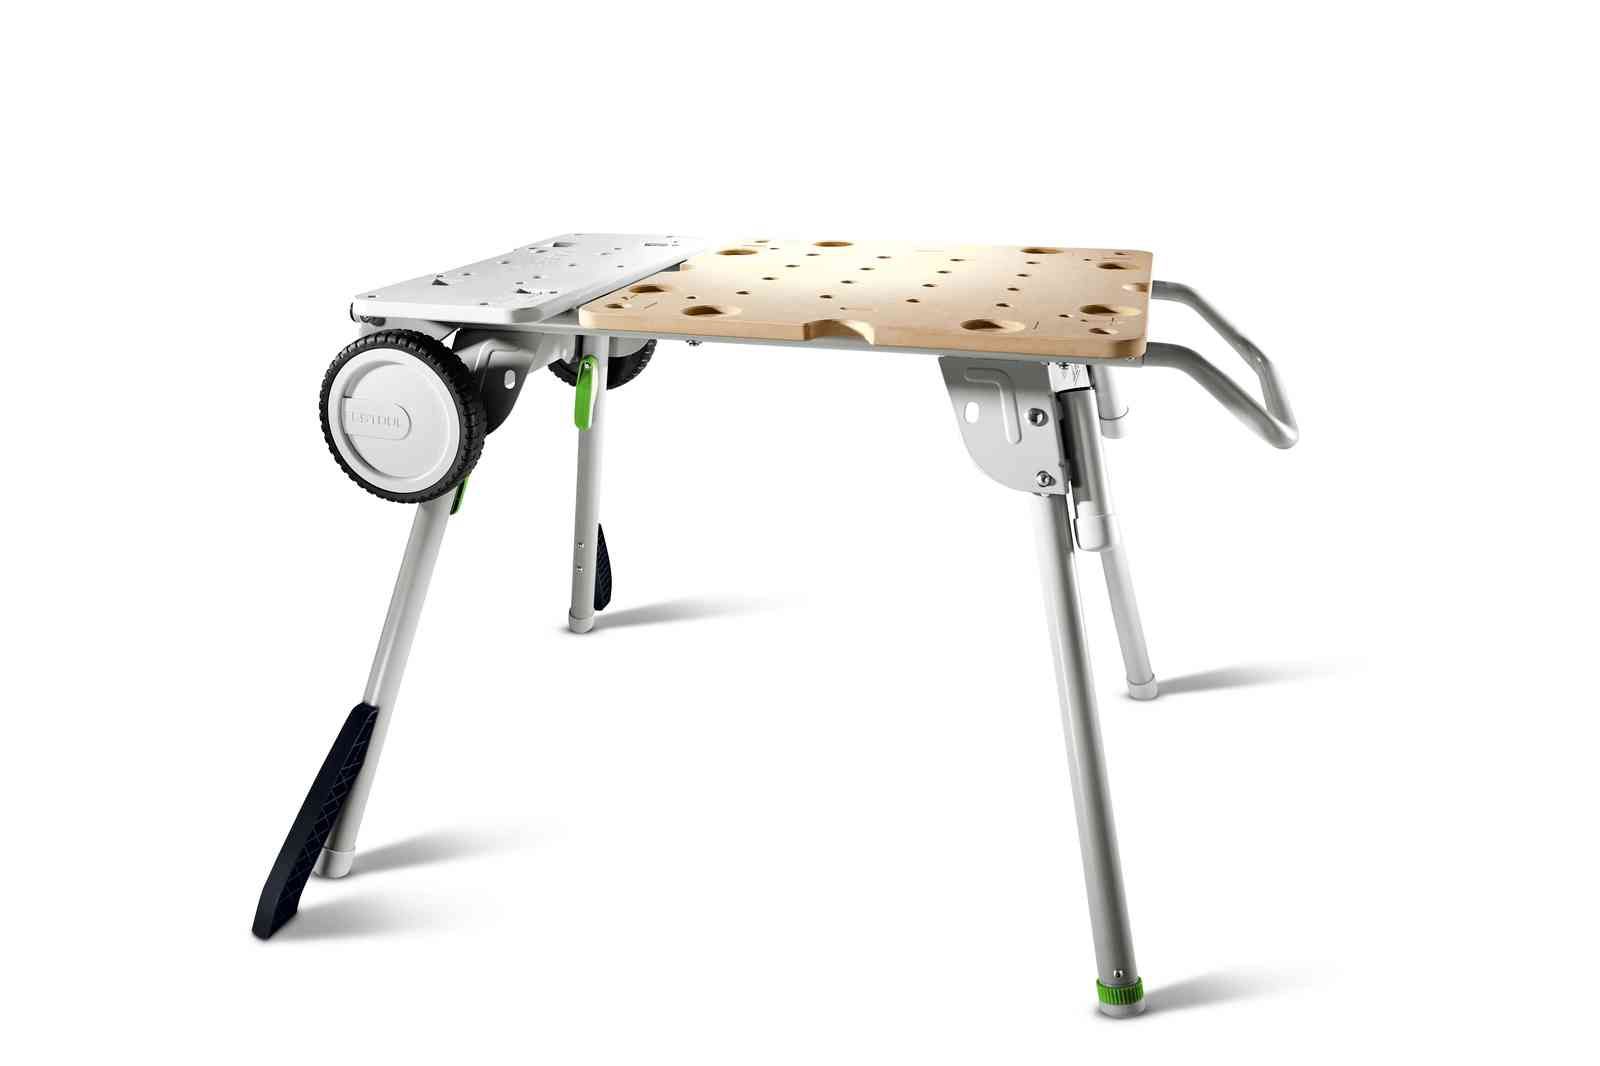 Systainer Saw Mobile Underframe 577001 by Festool